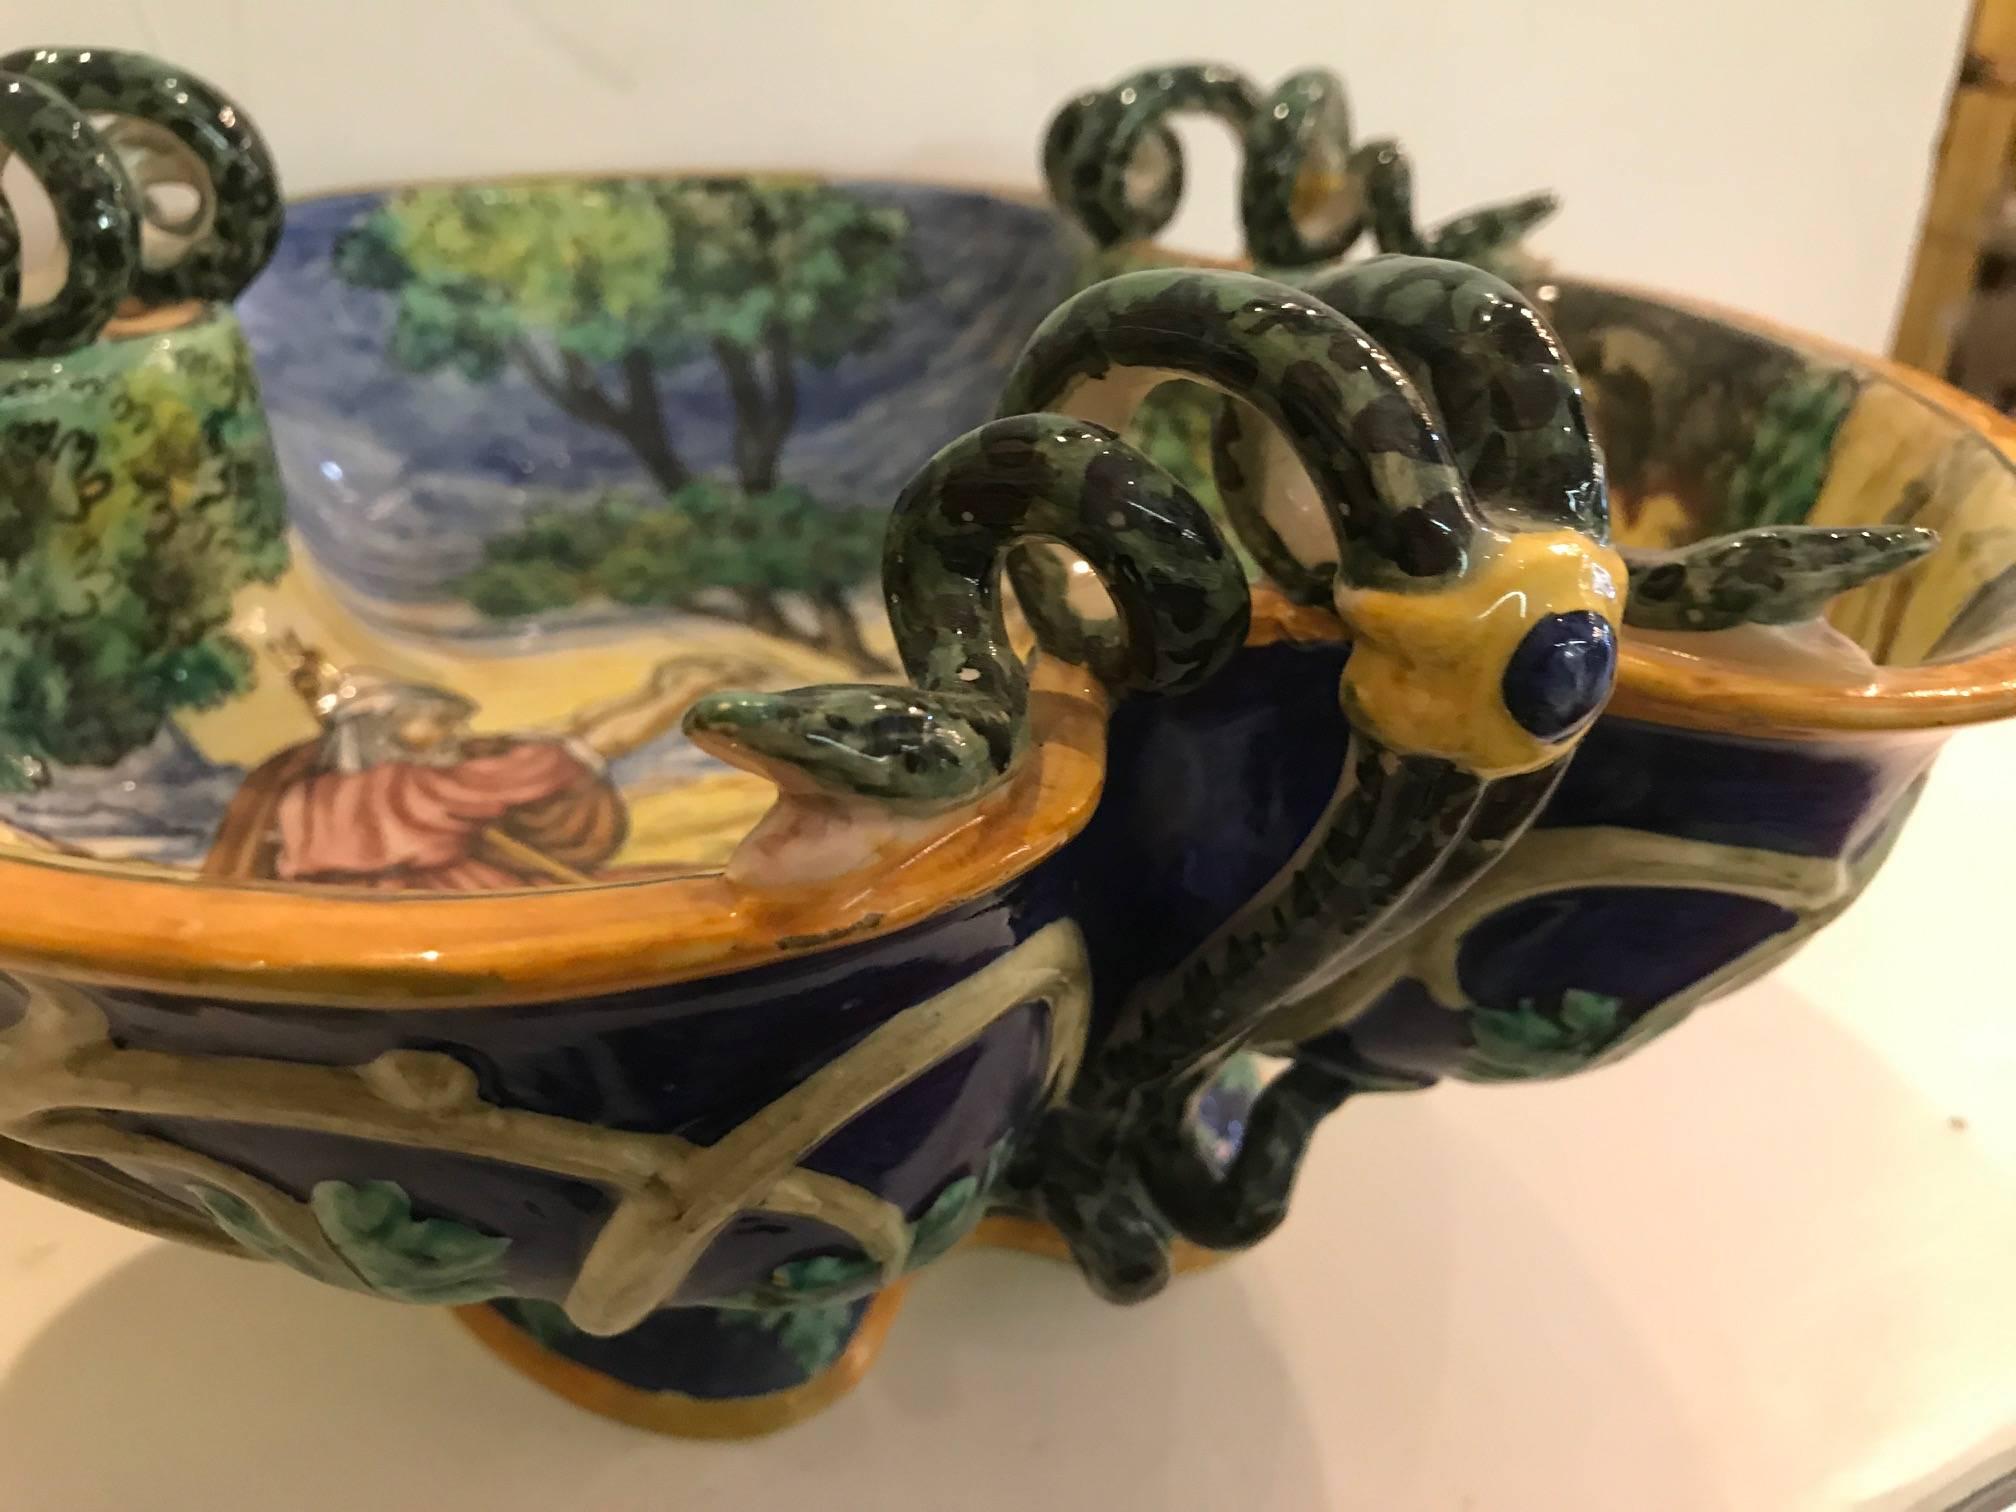 Elaborately painted Italian faience pedestal bowl. Vibrant colors with a central biblical scene with three snake handles on the outer edge. The underside with a cobalt blue background with a grape leaf pattern.